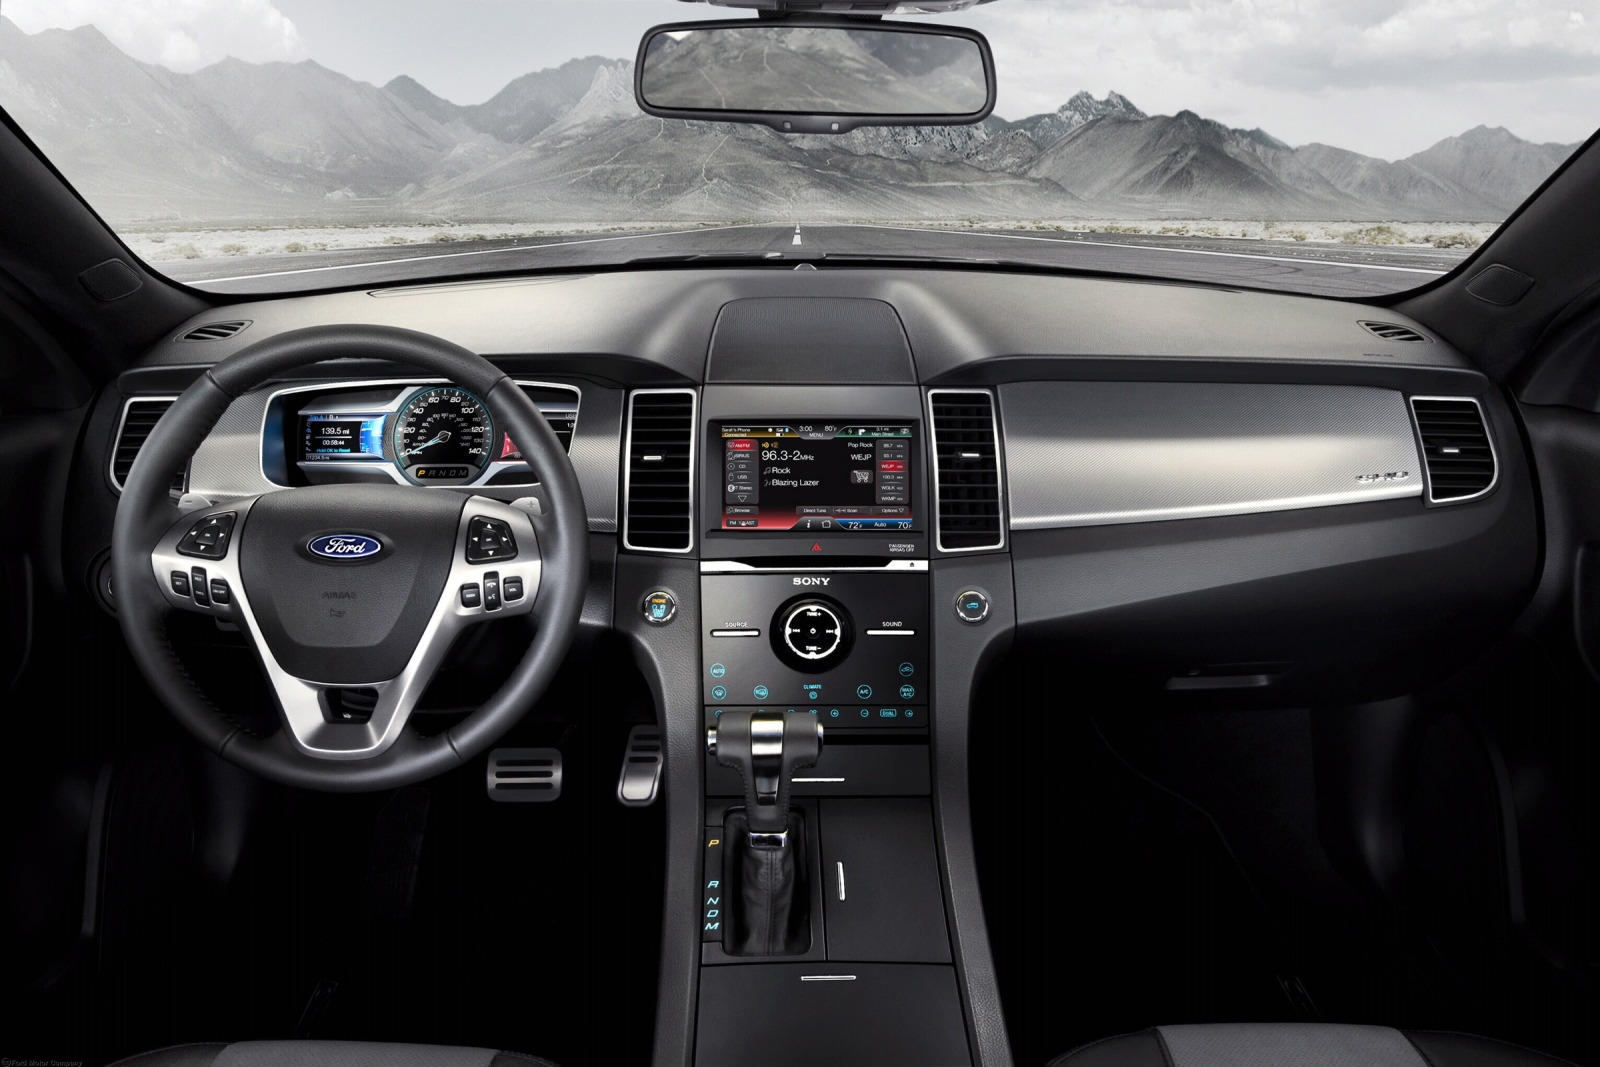 2019 Ford Taurus Interior Dimensions: Seating, Cargo Space & Trunk Size -  Photos | CarBuzz